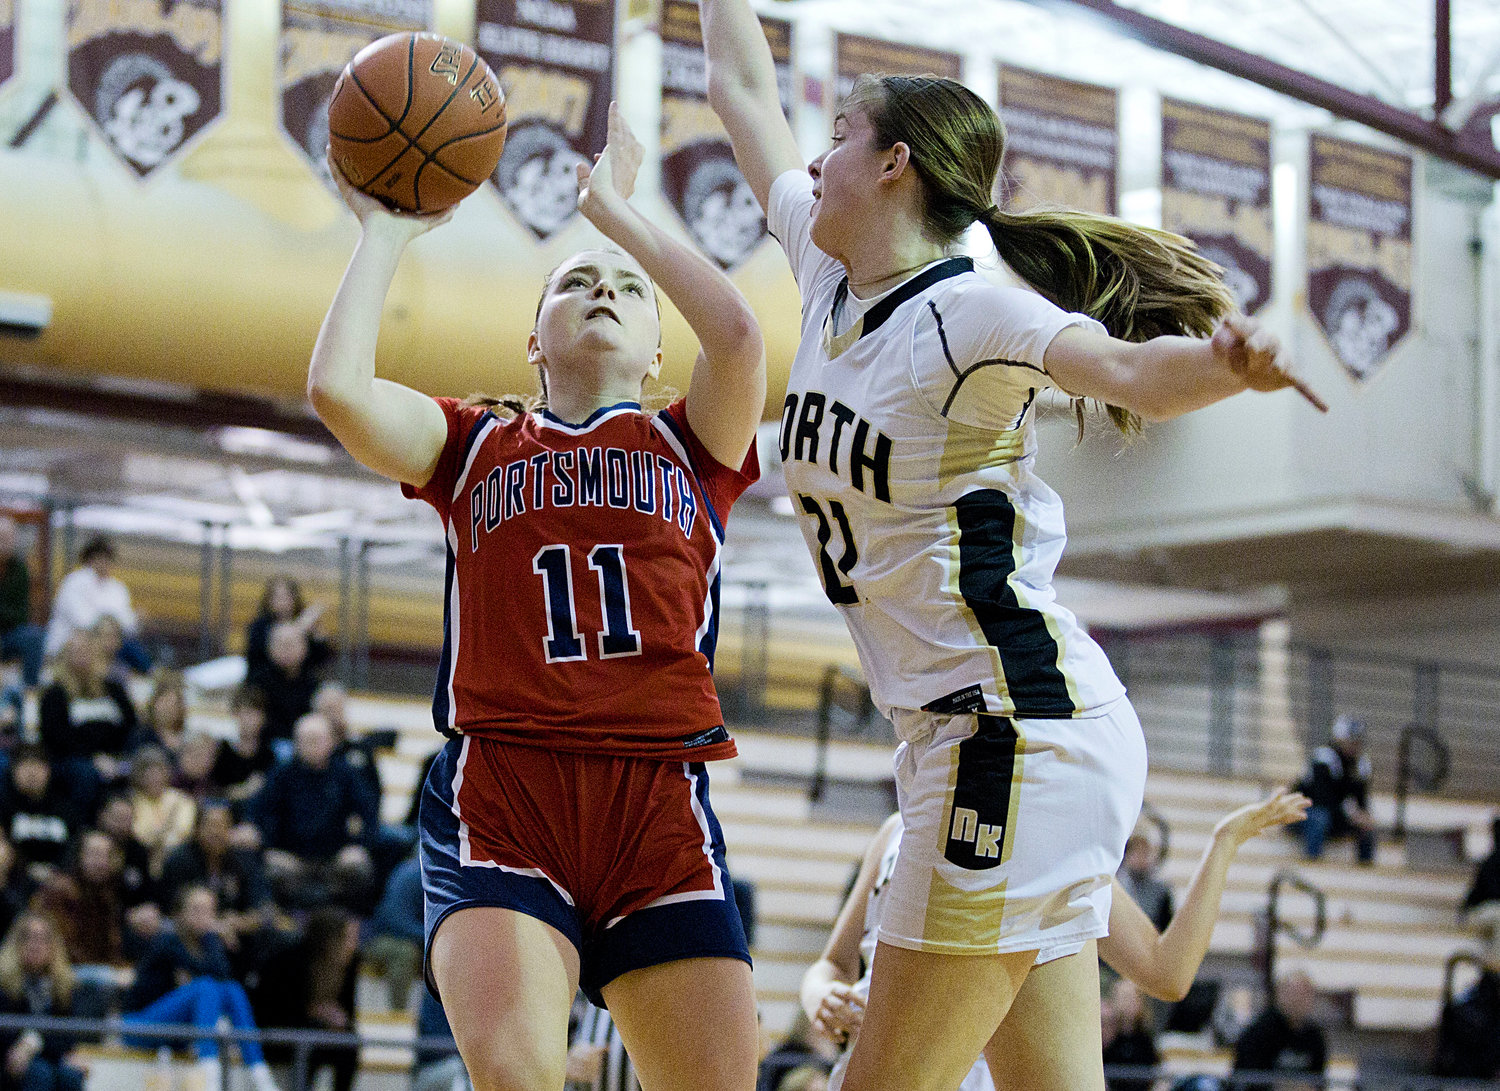 Maeve Tullson gets under the hoop to make a shot during the second half of Saturday’s game against North Kingstown.